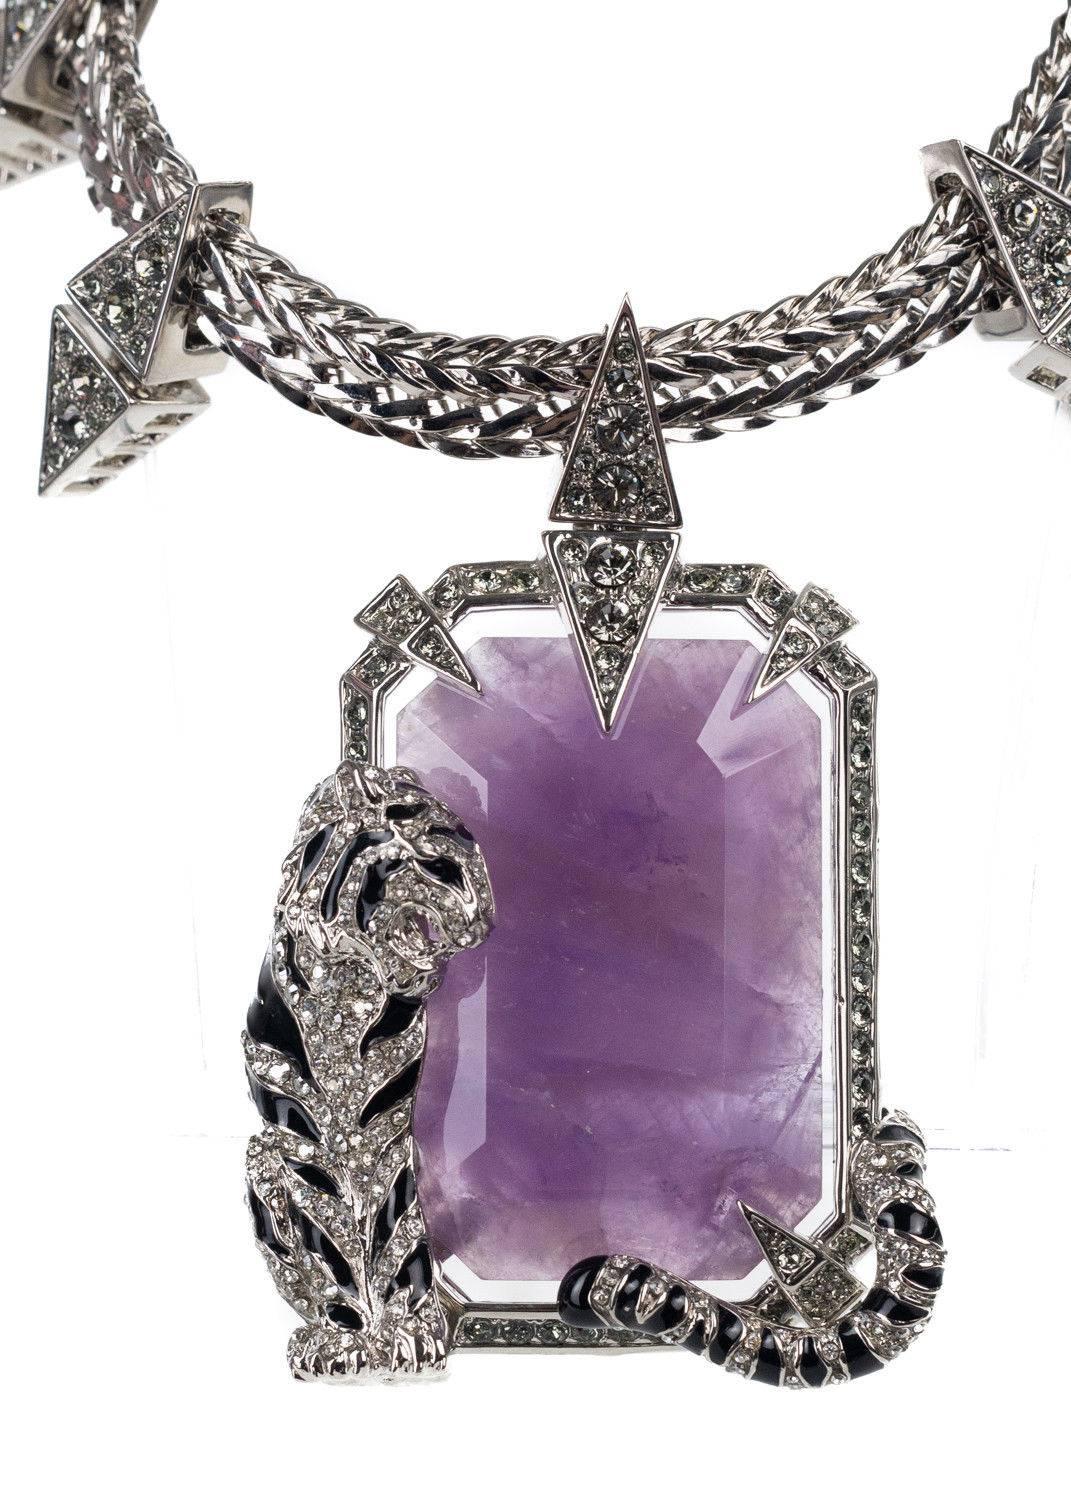 Roberto Cavalli silver plated necklace. This necklace features a purple stone with a black enamel and swarovski encrusted detailing tiger. Perfect for a statemented look, style itw ith a solid plan top for this beauty to pop.

 

Brass and Swarovski